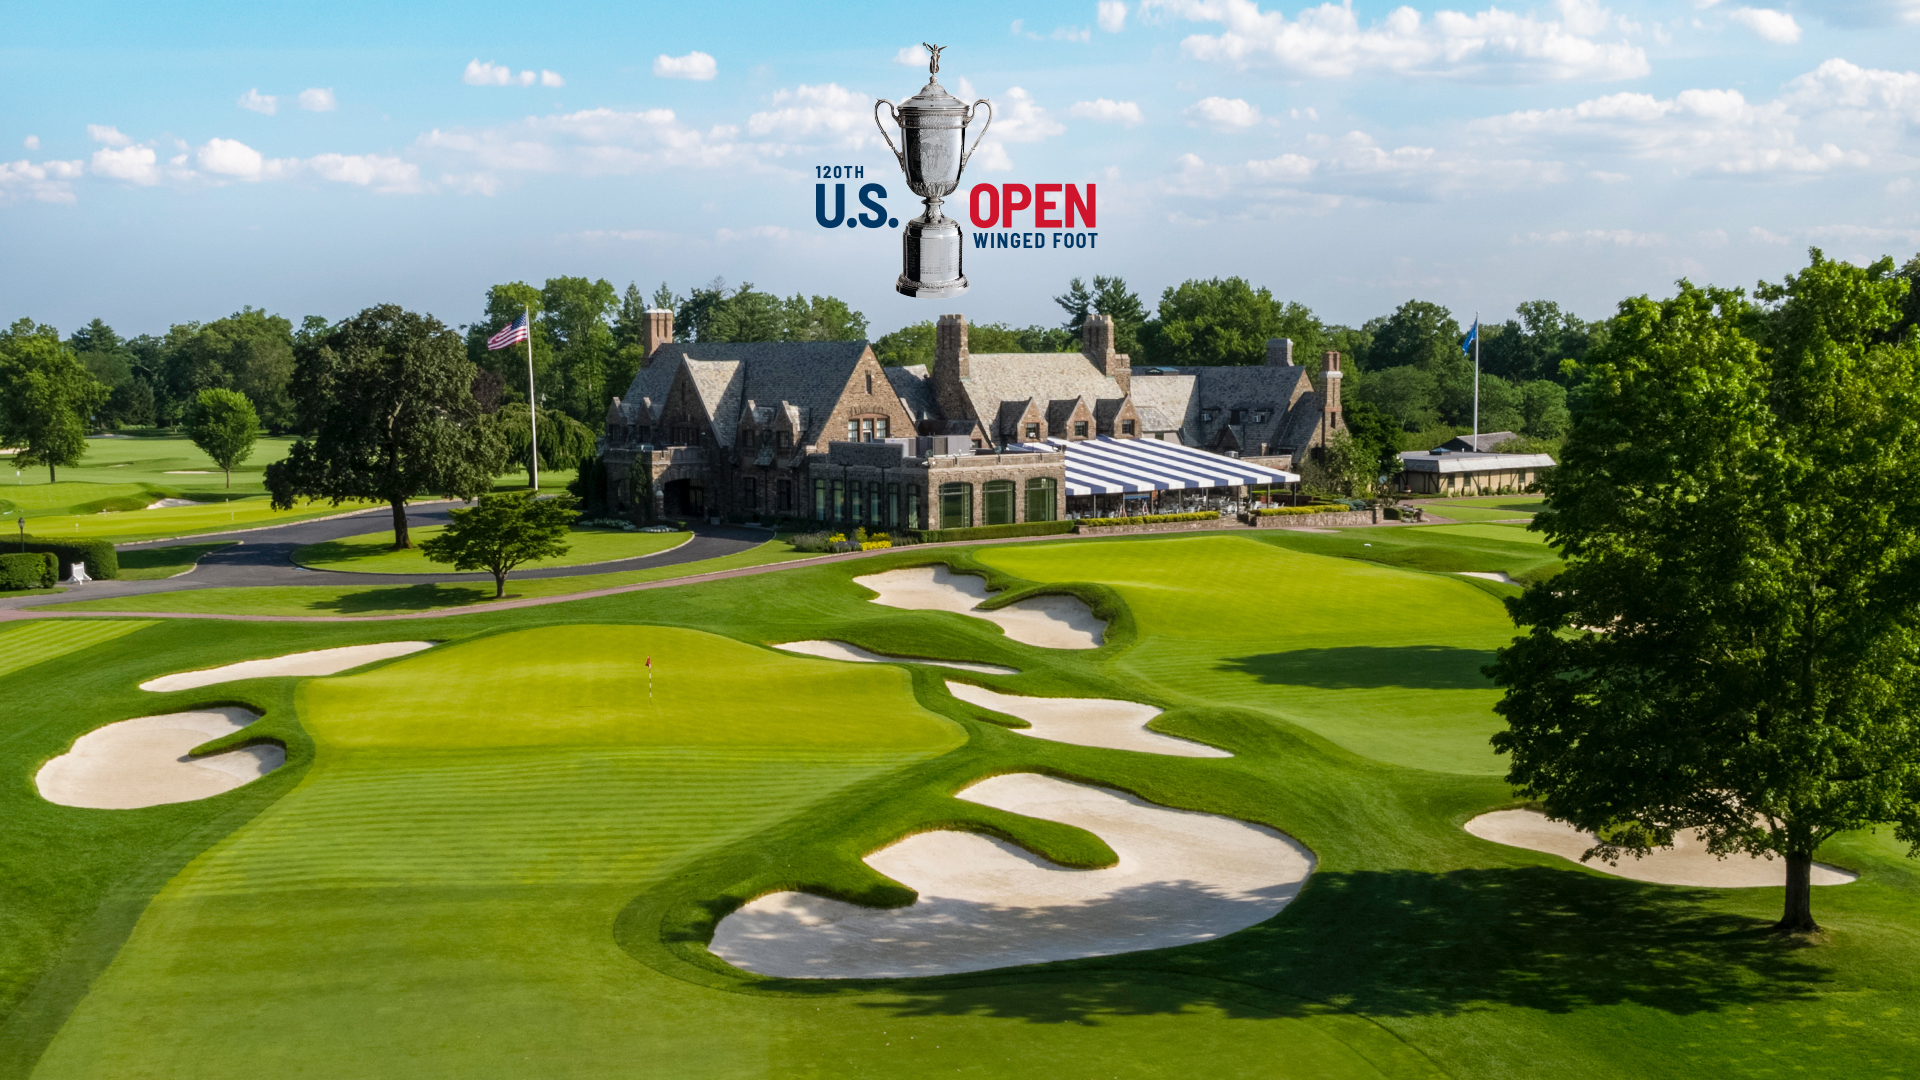 2020 U.S. Open to be Conducted Without